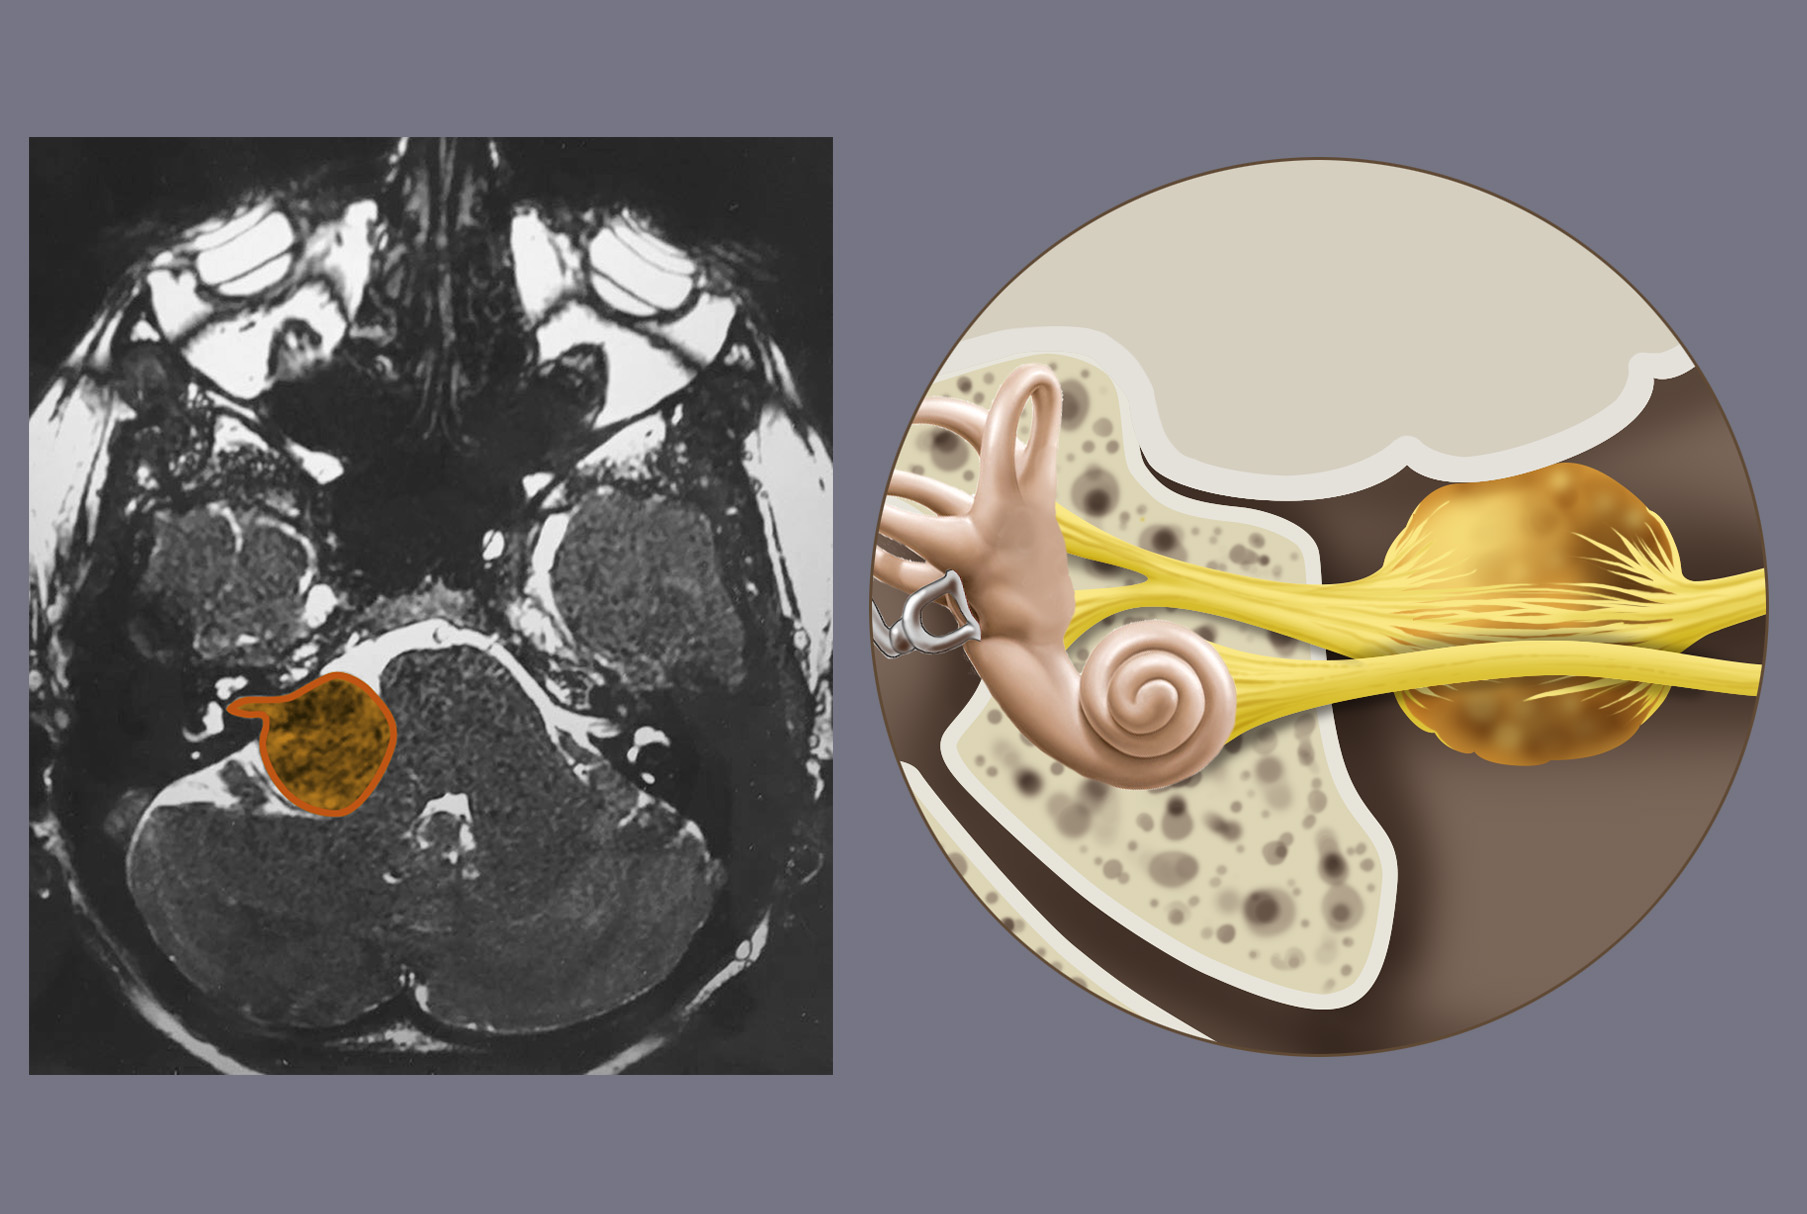 The acoustic neuroma is a benign slow-growing tumor originating from the vestibular nerve  in the internal auditory meatus. As you can see, it can reach a considerable size